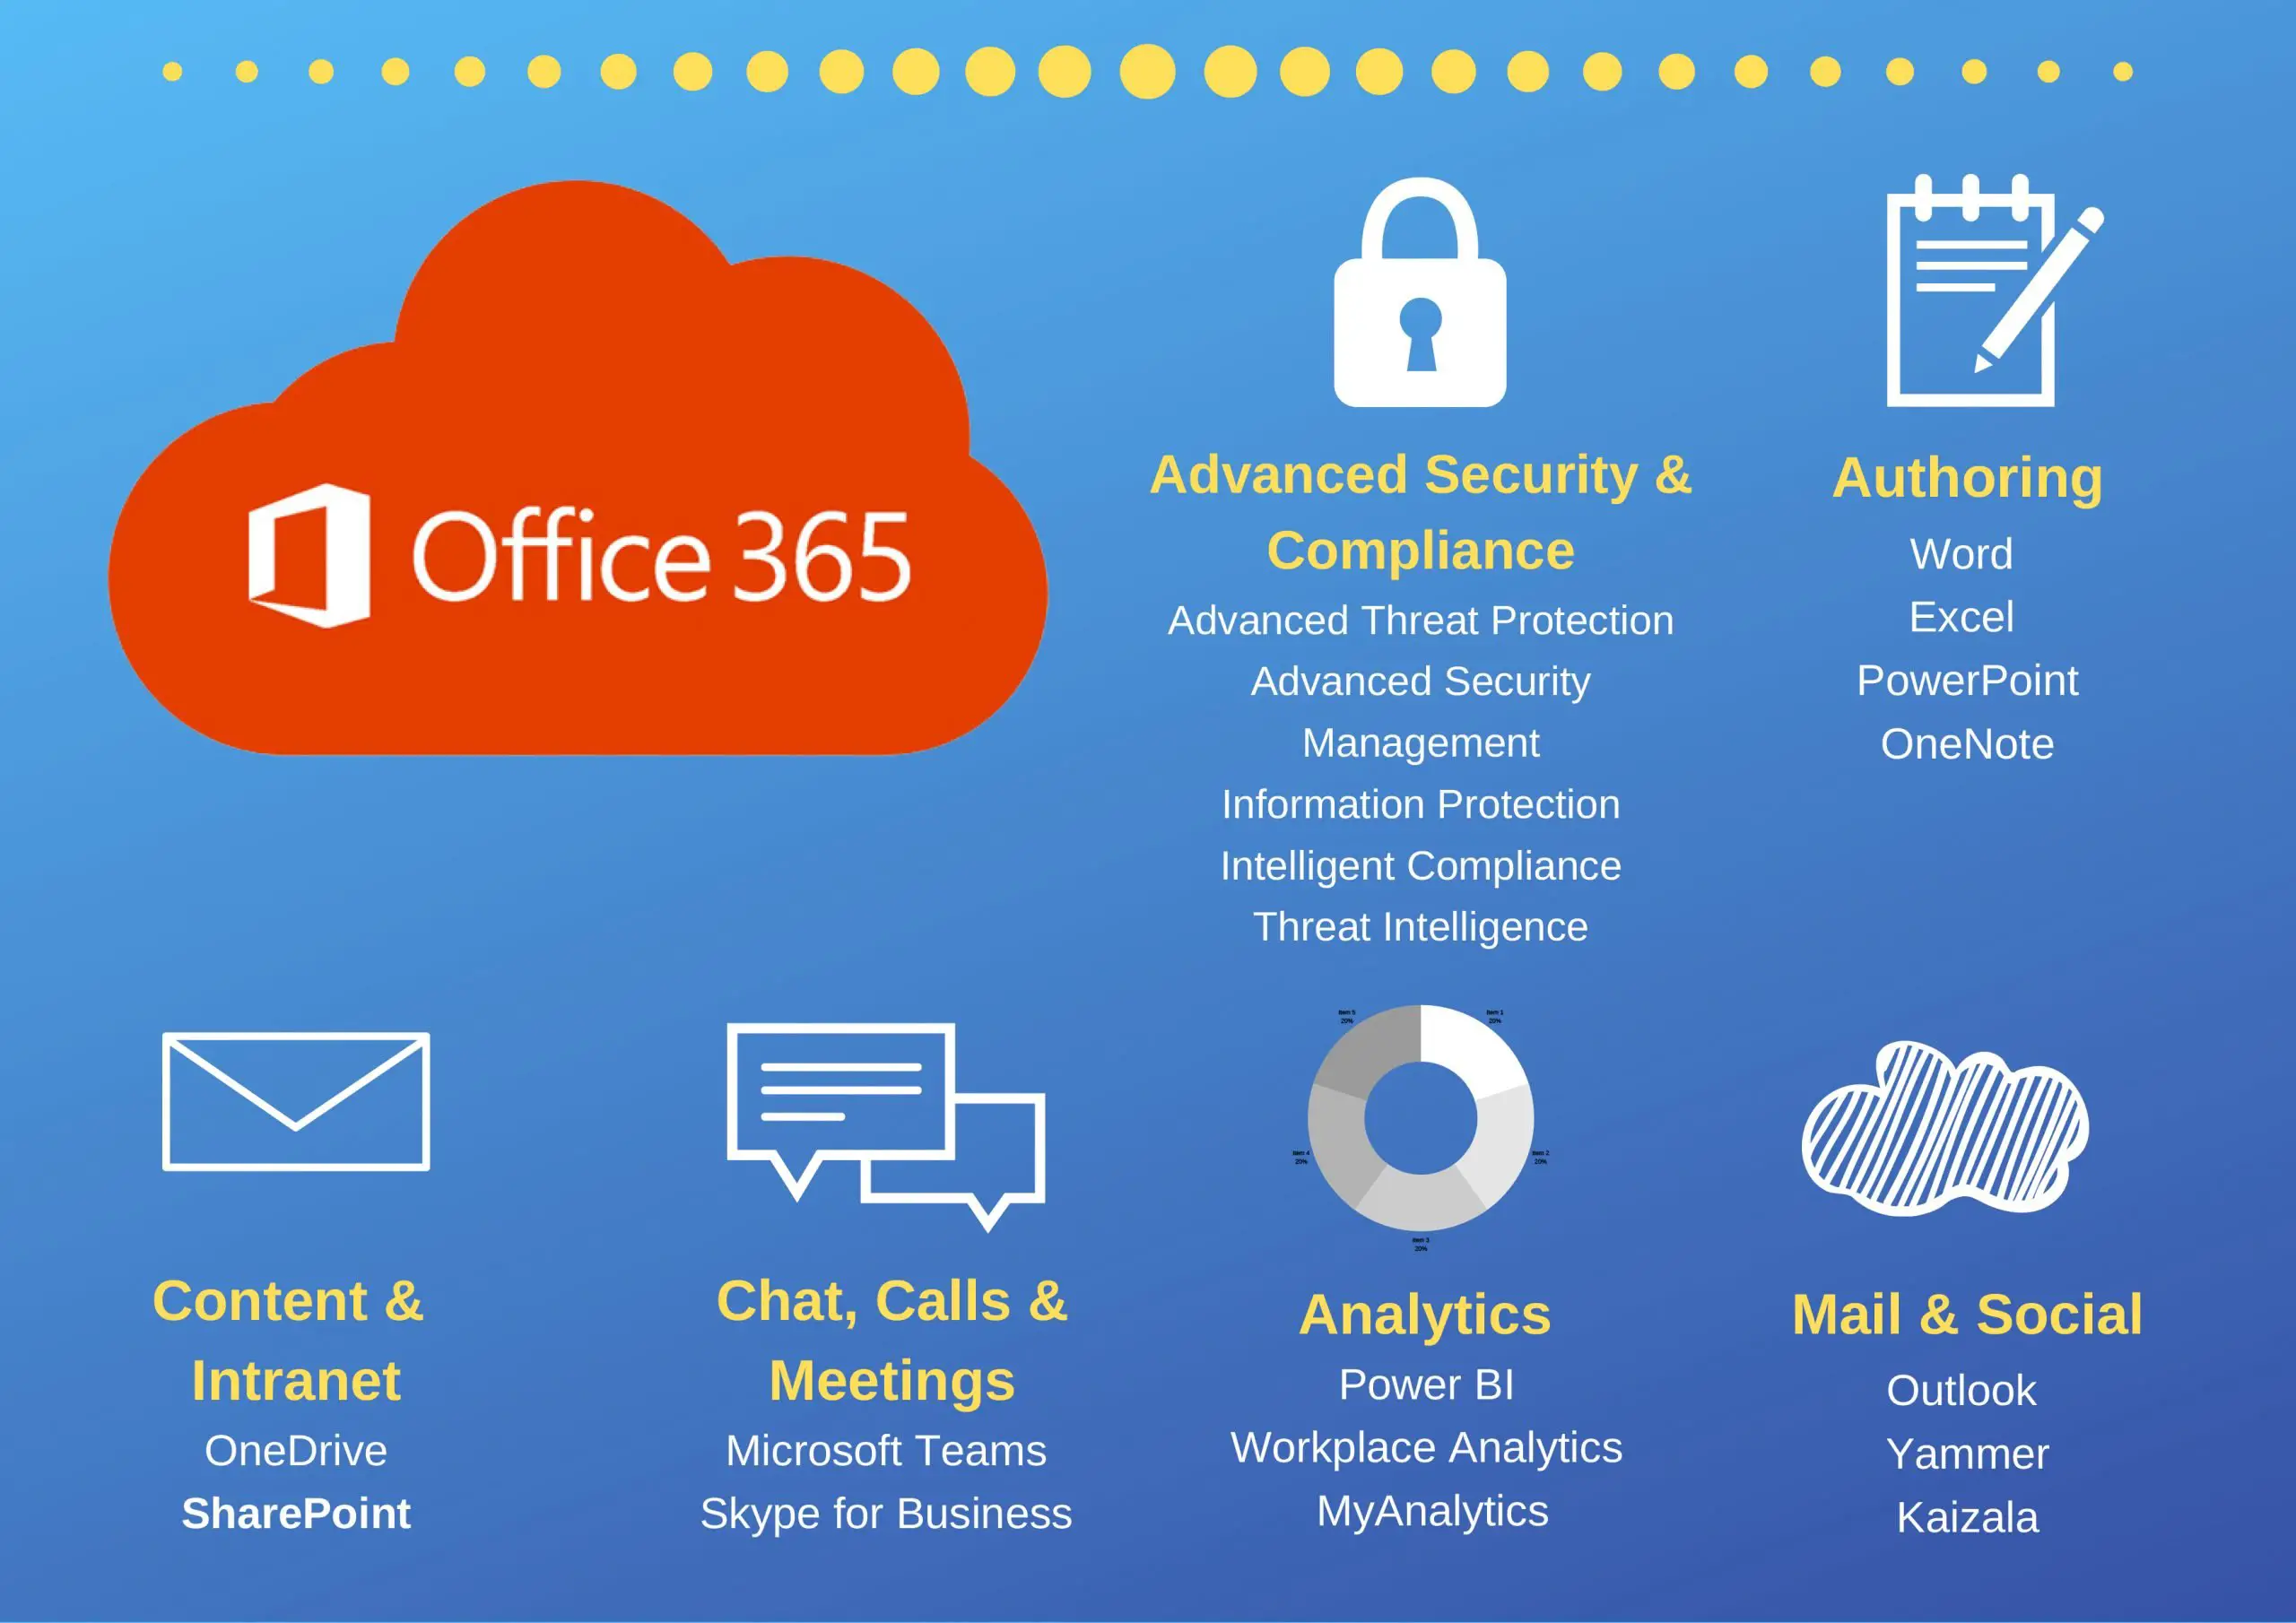 Why Choose Office 365 for Government Employees?